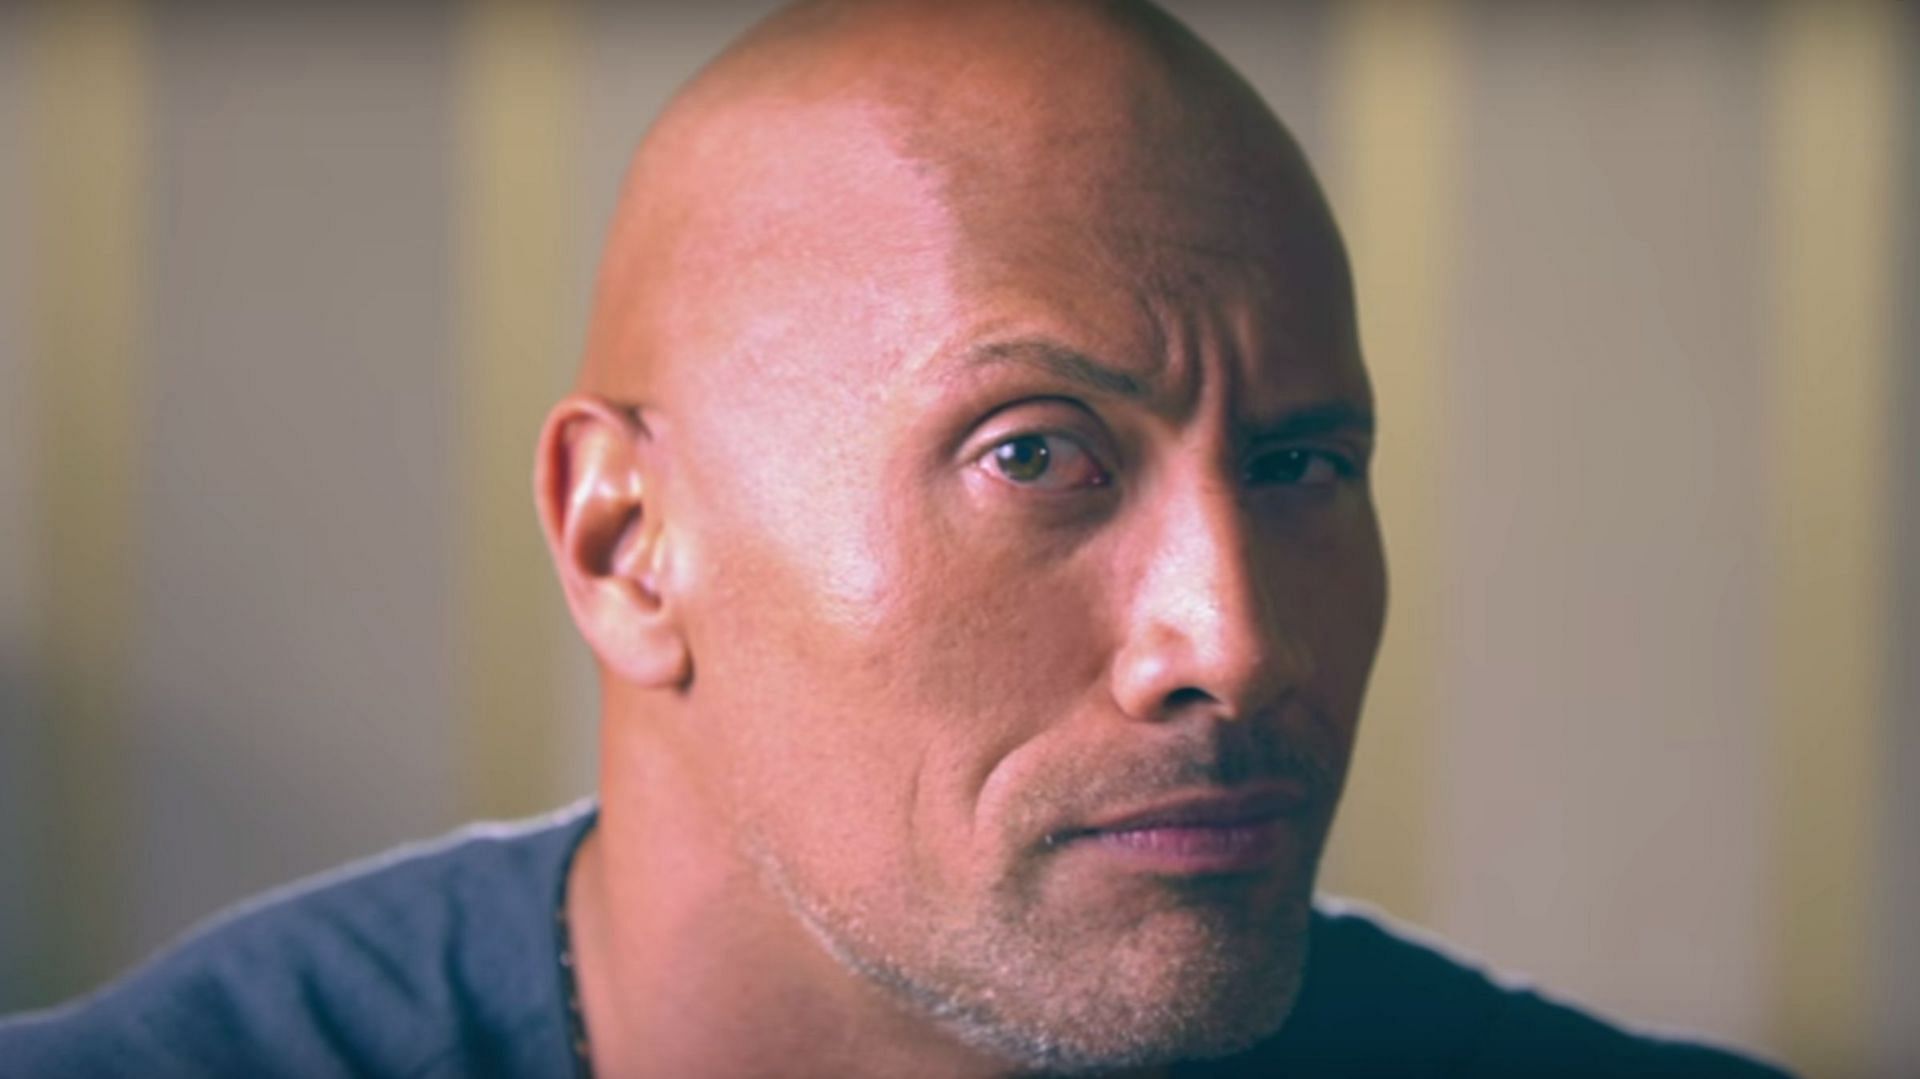 The Rock reveals a hilarious tidbit from his childhood.